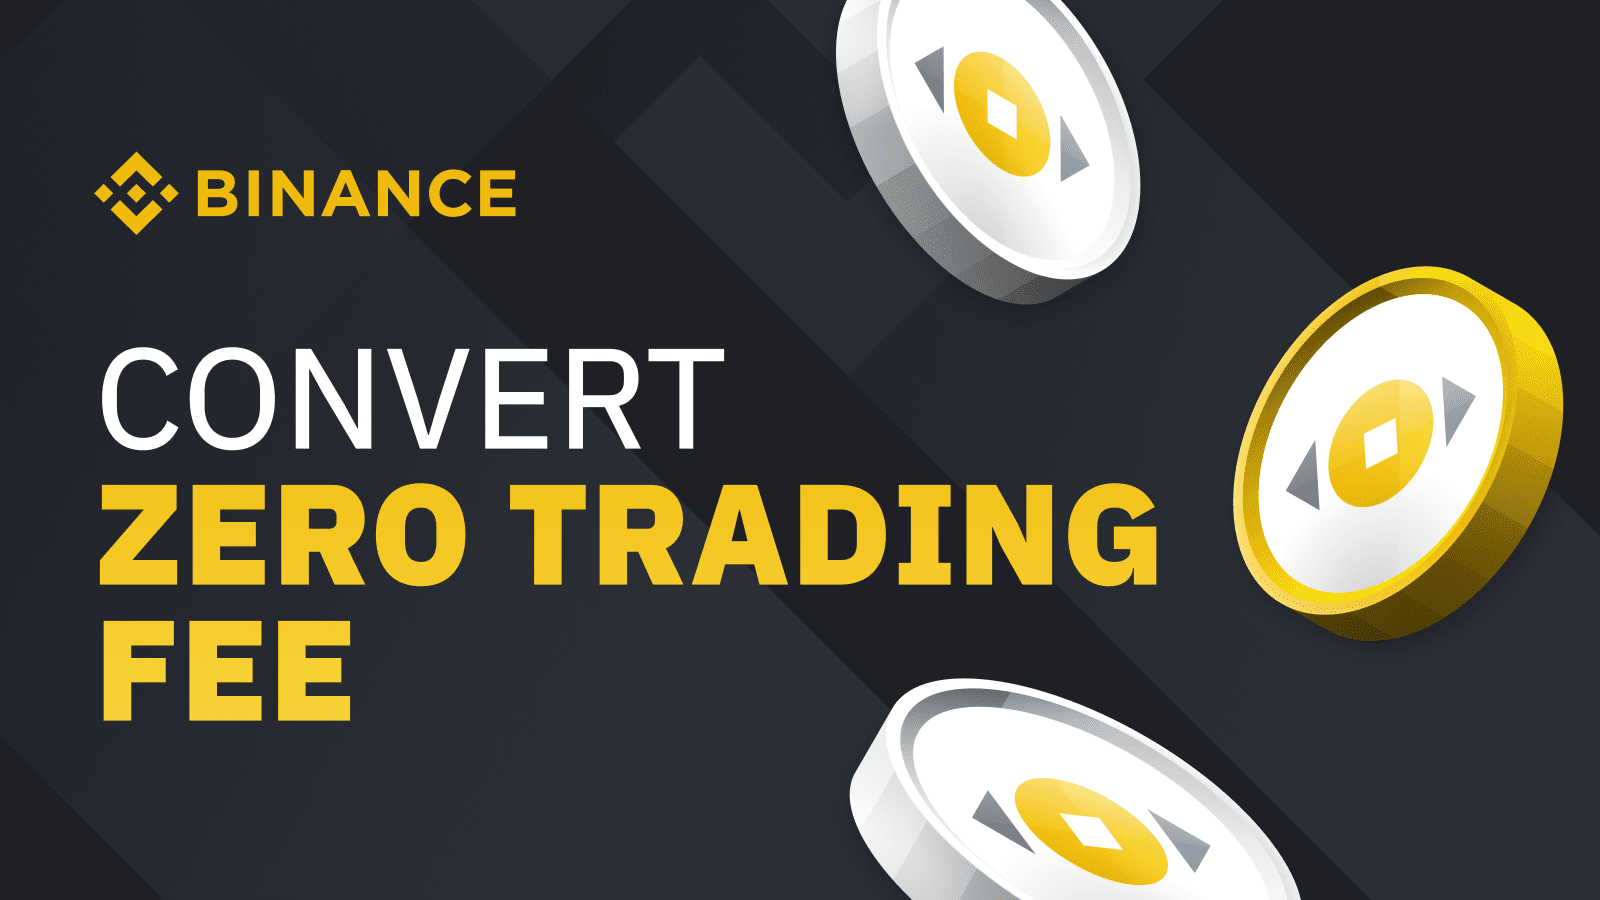 Everything You Need to Know About Binance Convert